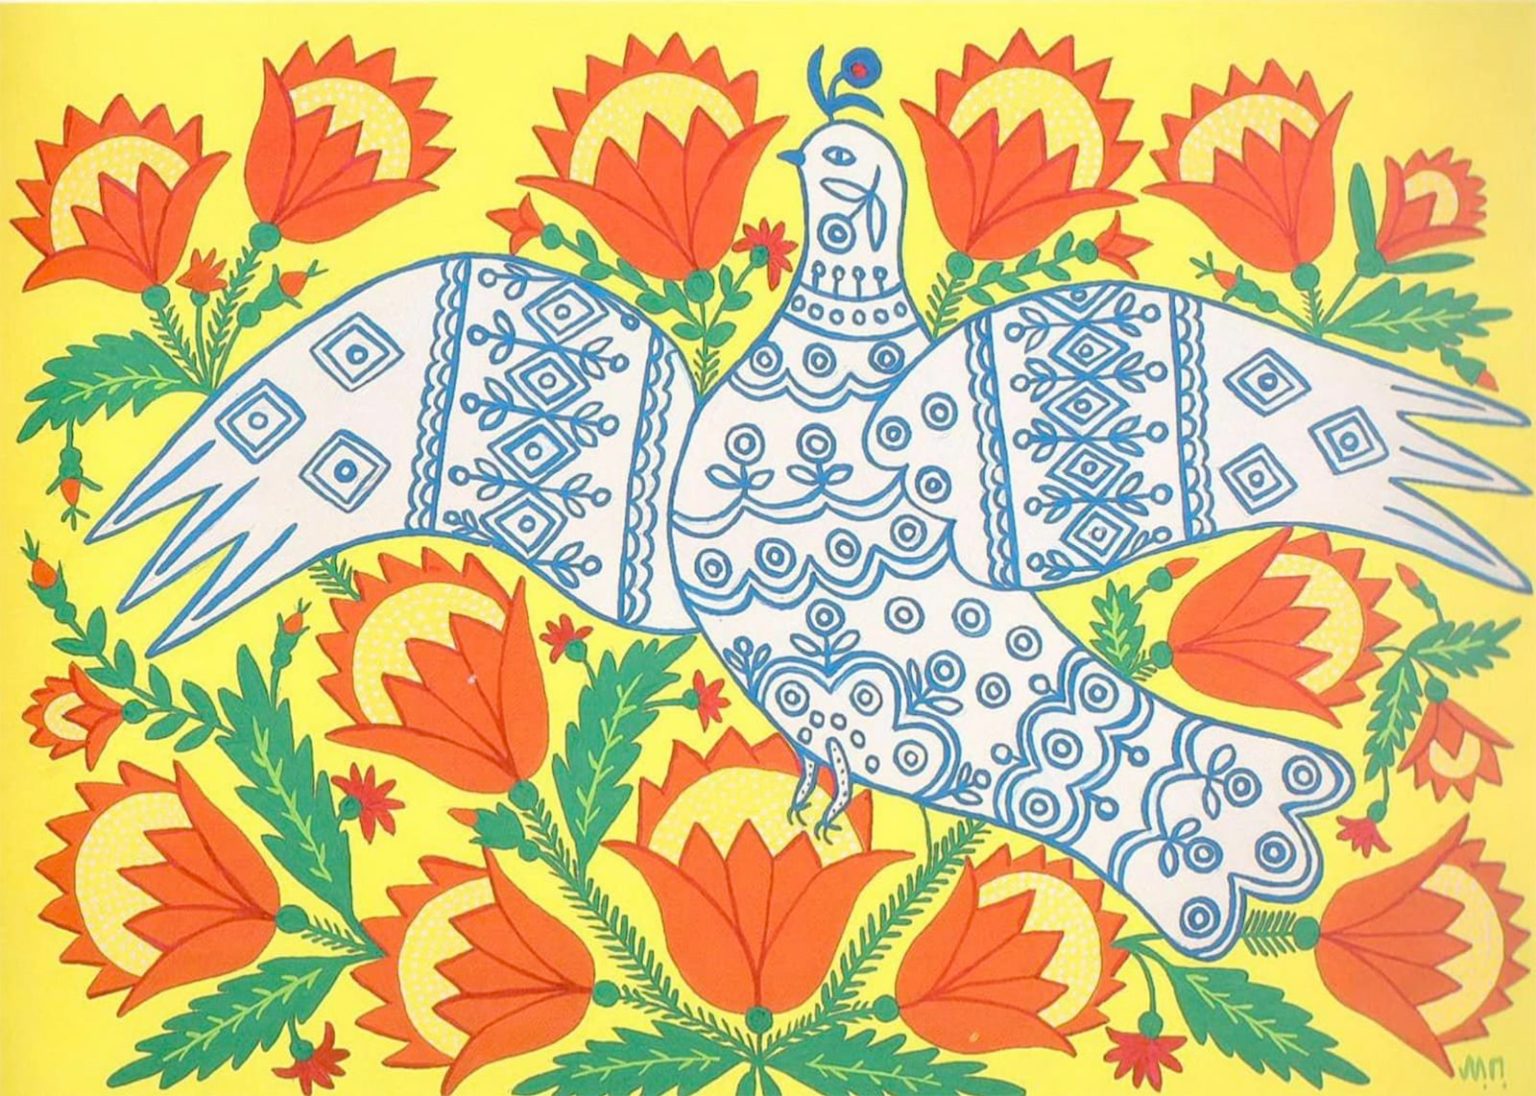 A colorful print features a bright yellow background atop which a large dove, outlined in blue with white interior stands with open wings. Intricate patterns rendered in blue adorn the dove's body and wings. Red flowers with green stems and yellow centers make up the background, as they seemingly sprout upwards and outwards.